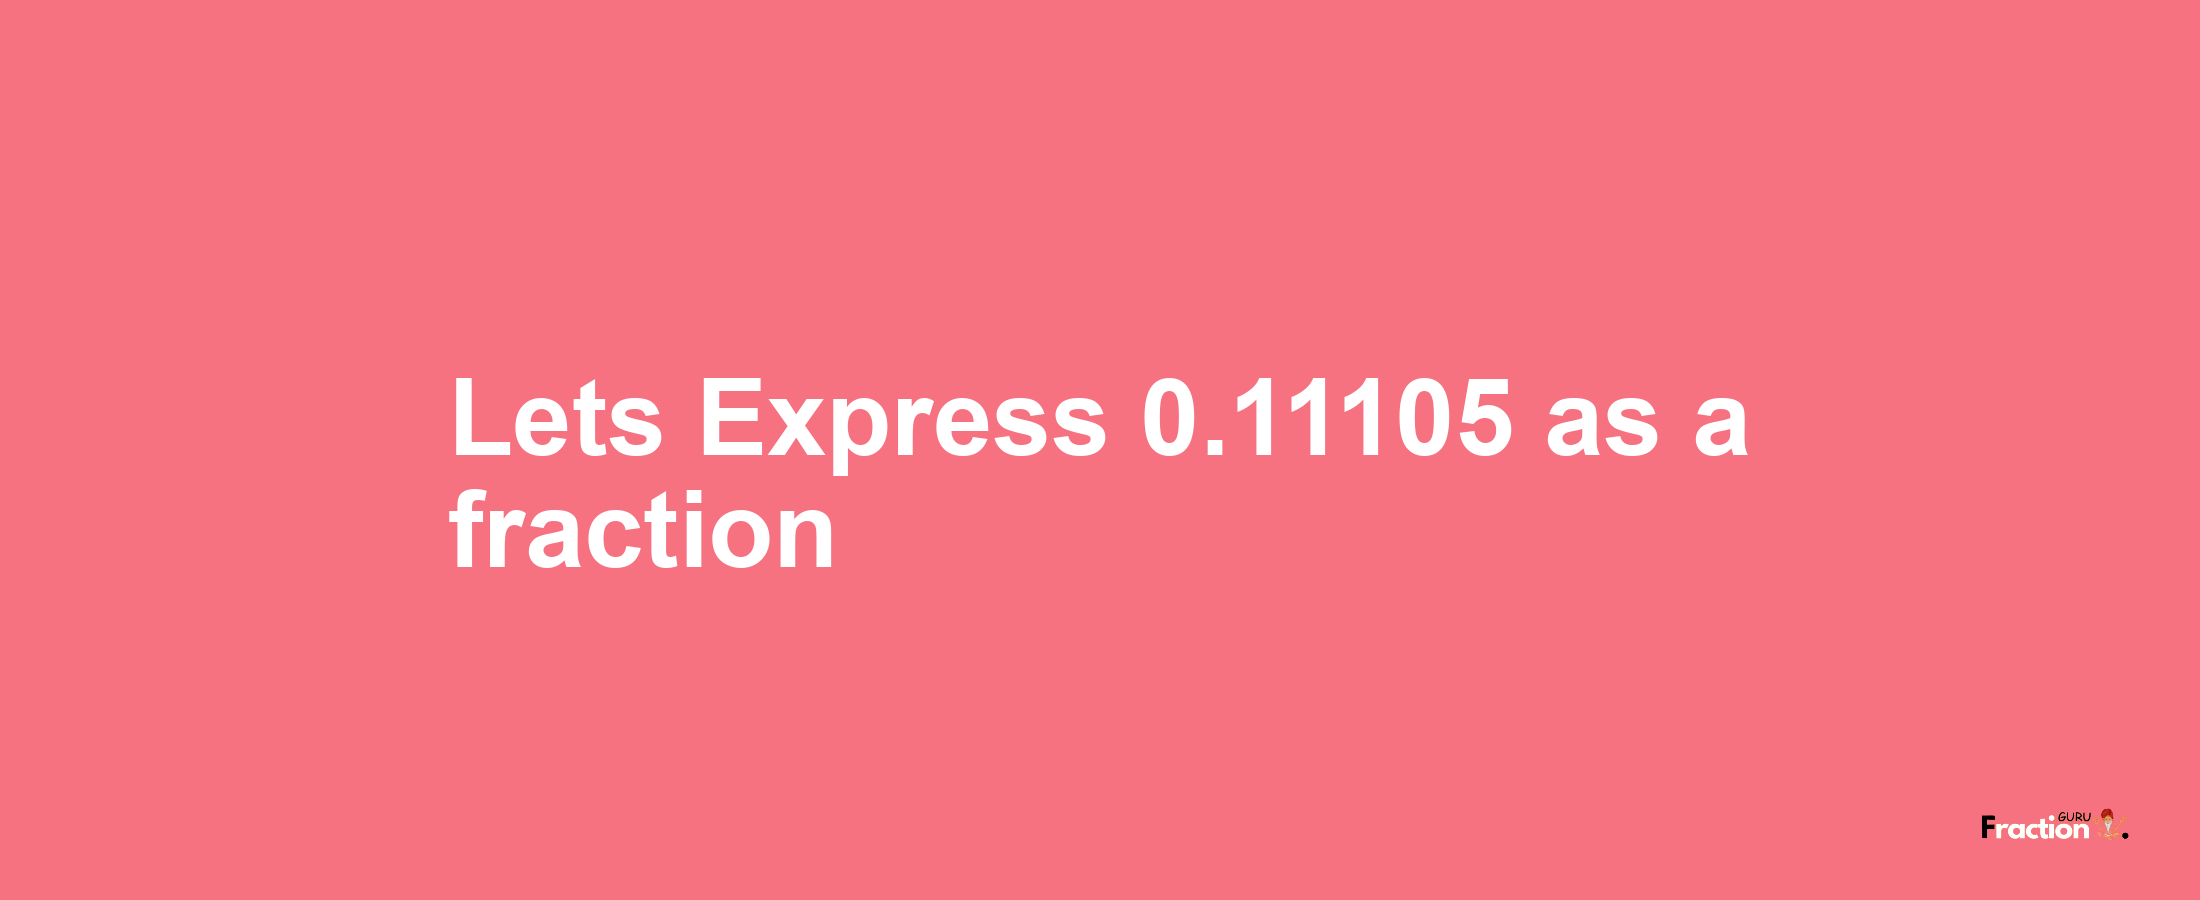 Lets Express 0.11105 as afraction